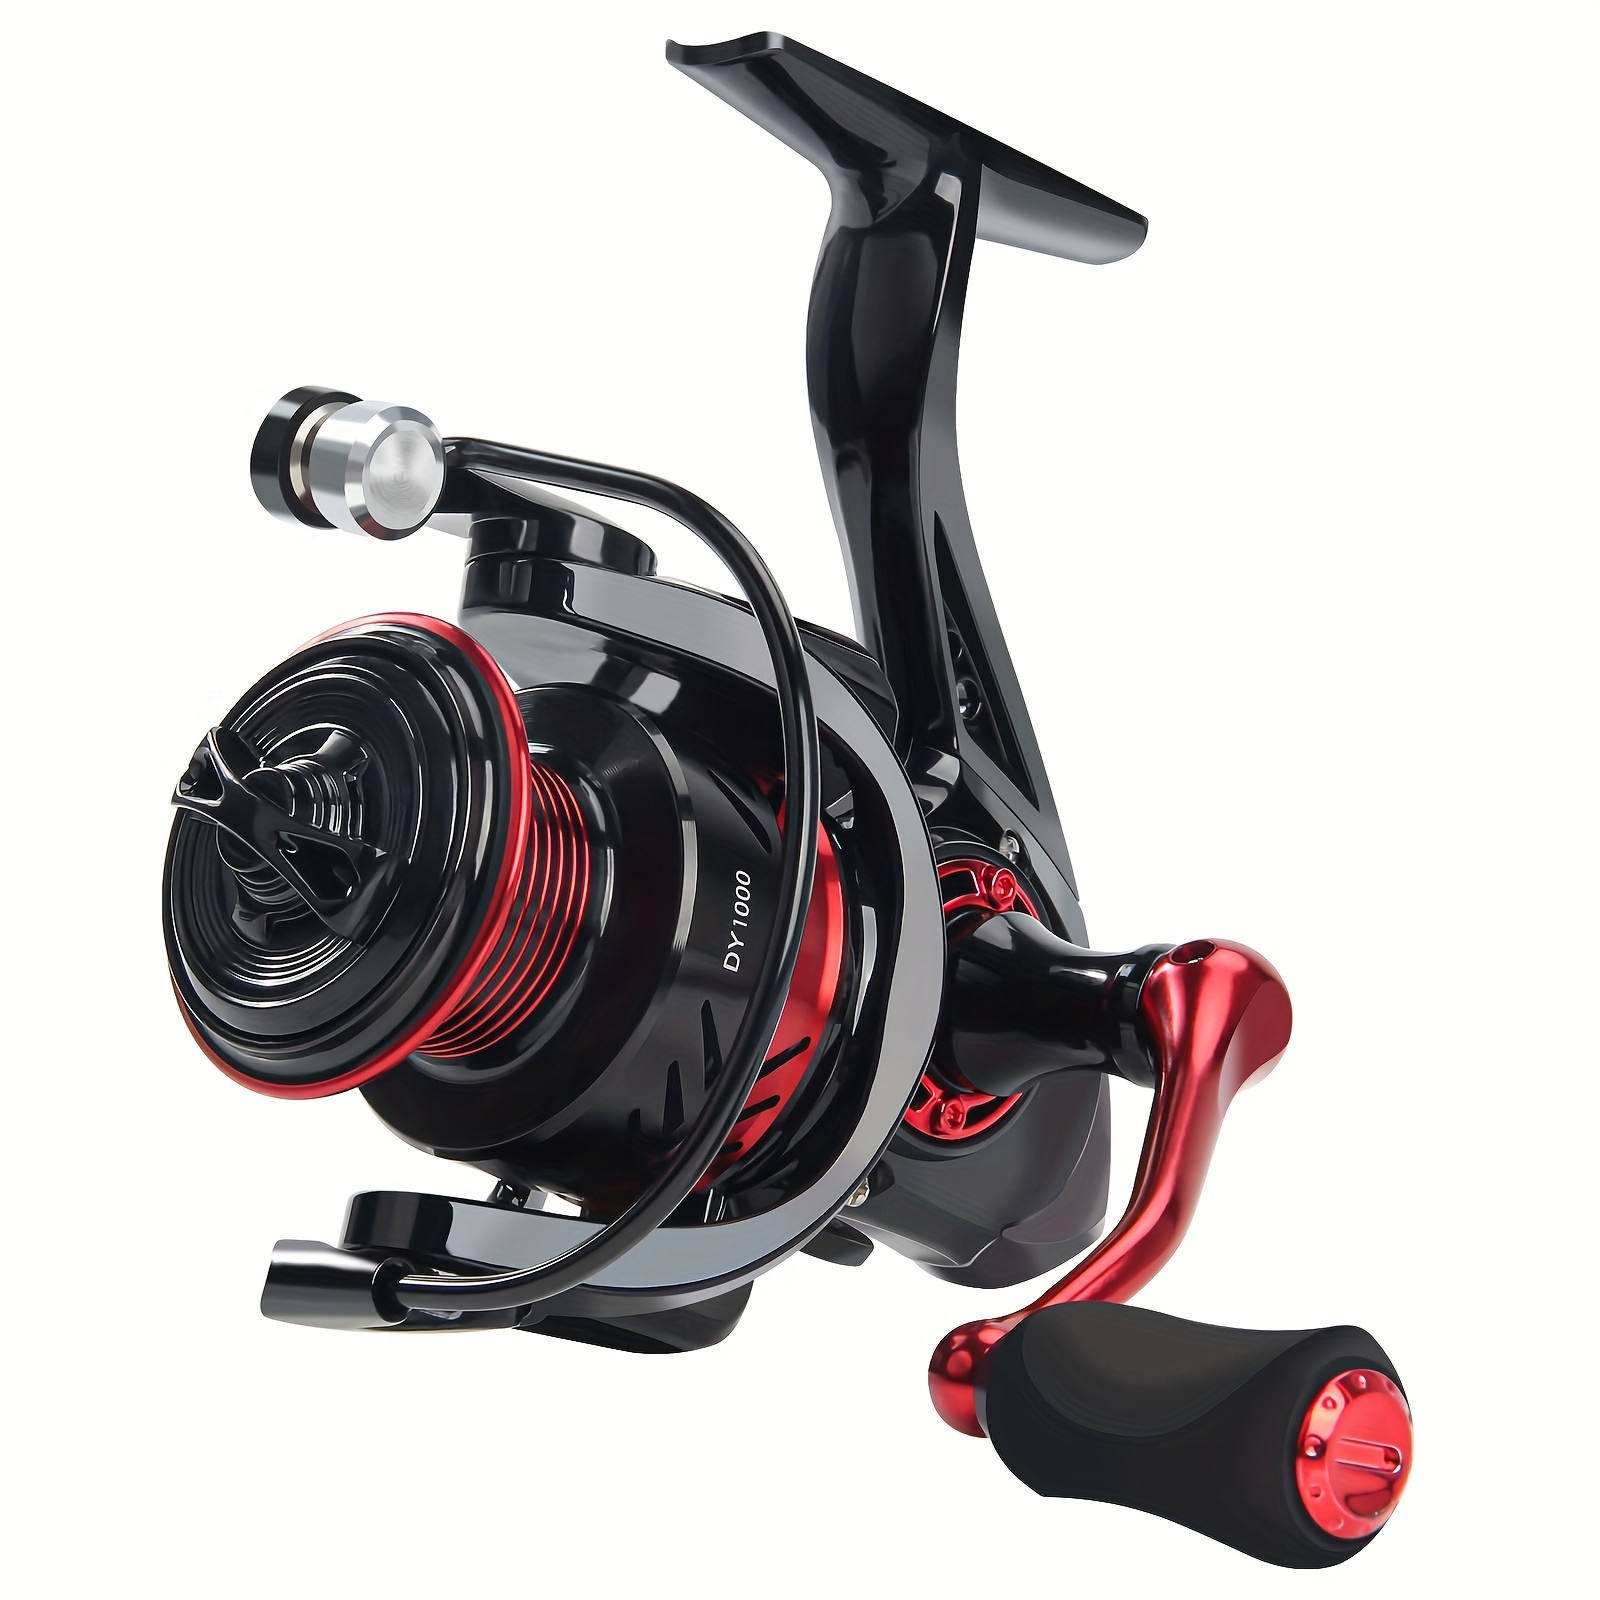 

Haut Ton 1000-7000 Series Spinning Reel, 5.2:1 Gear Ratio 13+1bb Fishing Reel With 33lbs Drag System, Fishing Tackle For Saltwater Freshwater